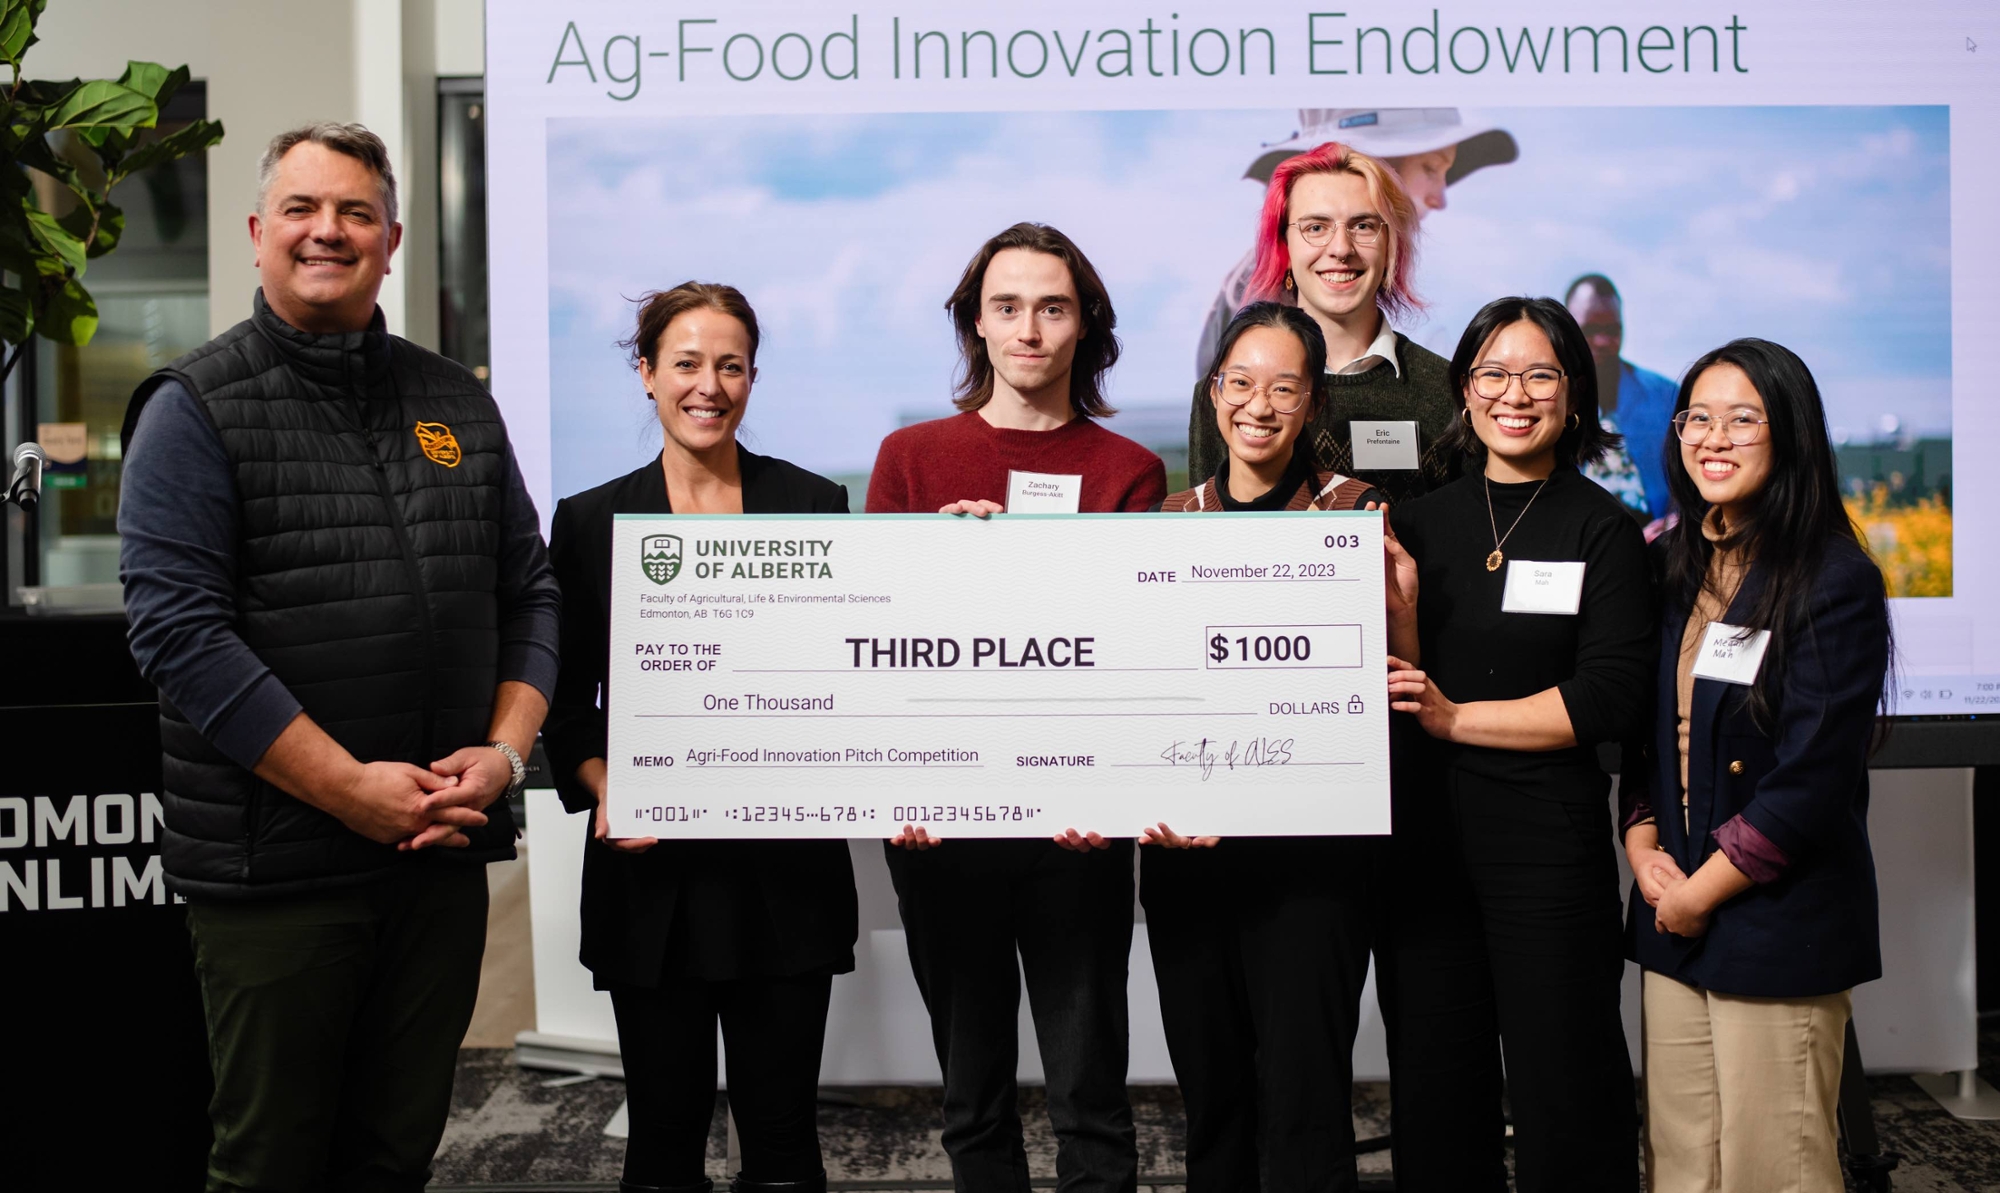 team of students pose with an oversized cheque for $1,000